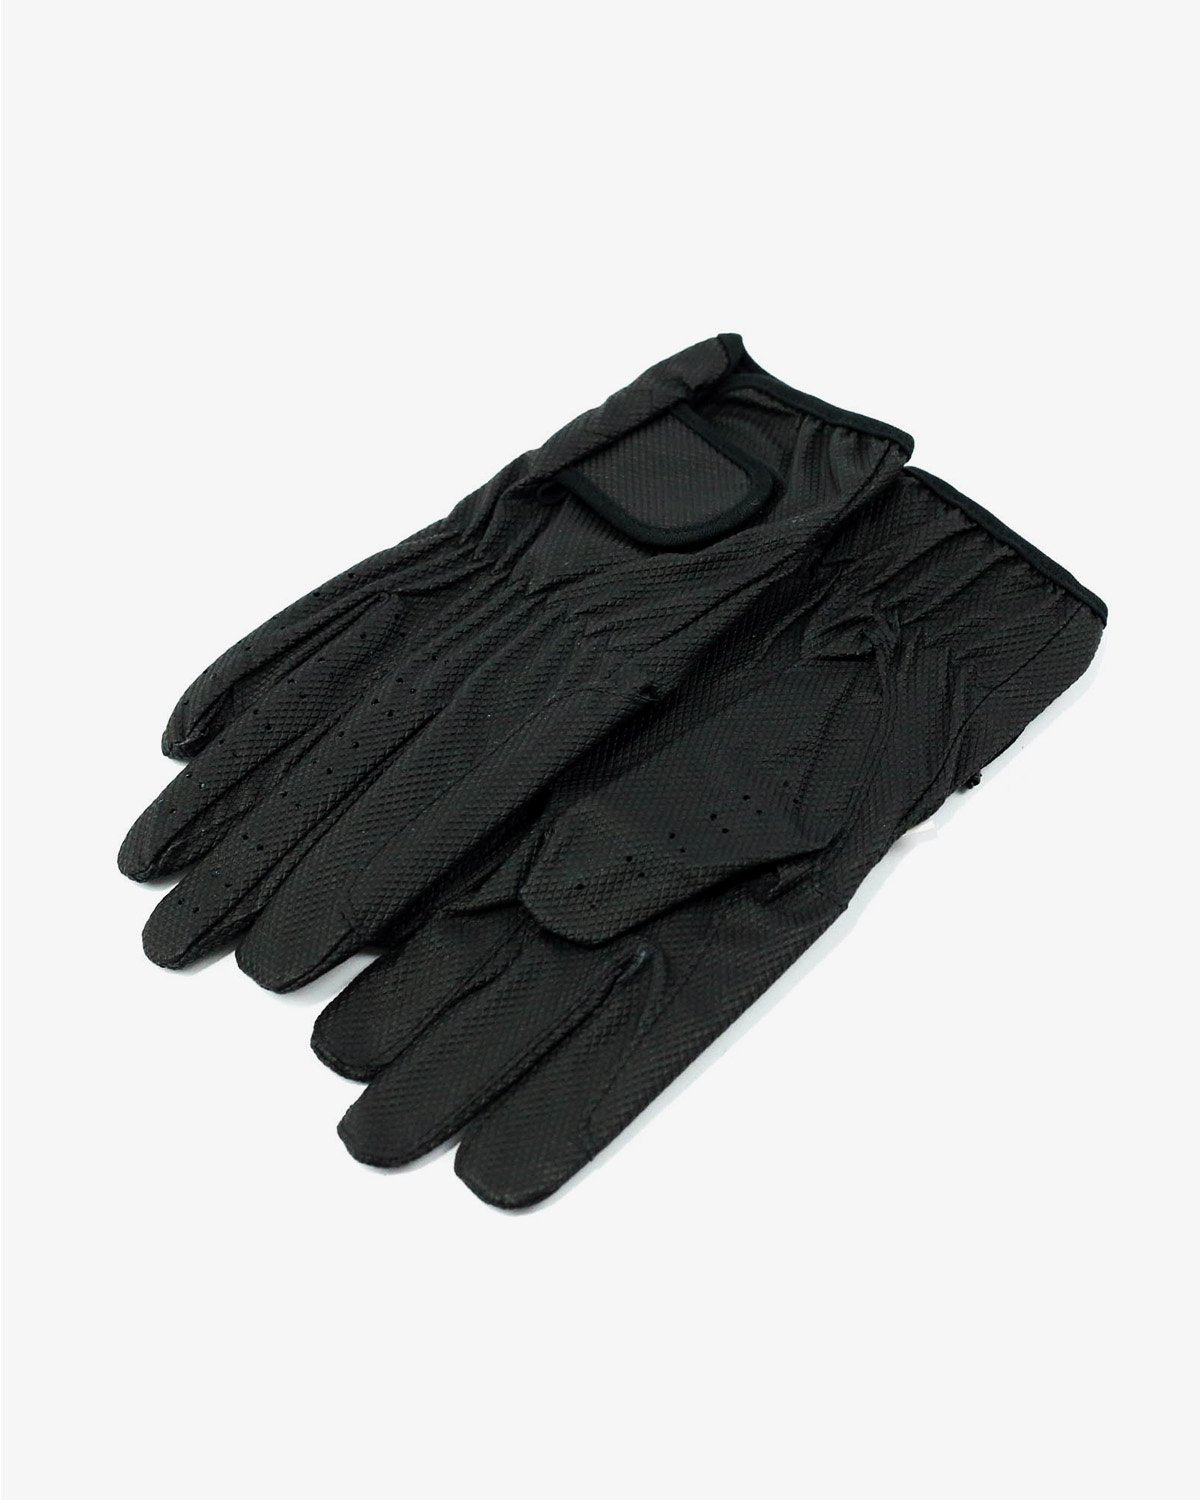 Synthetic Riding Gloves